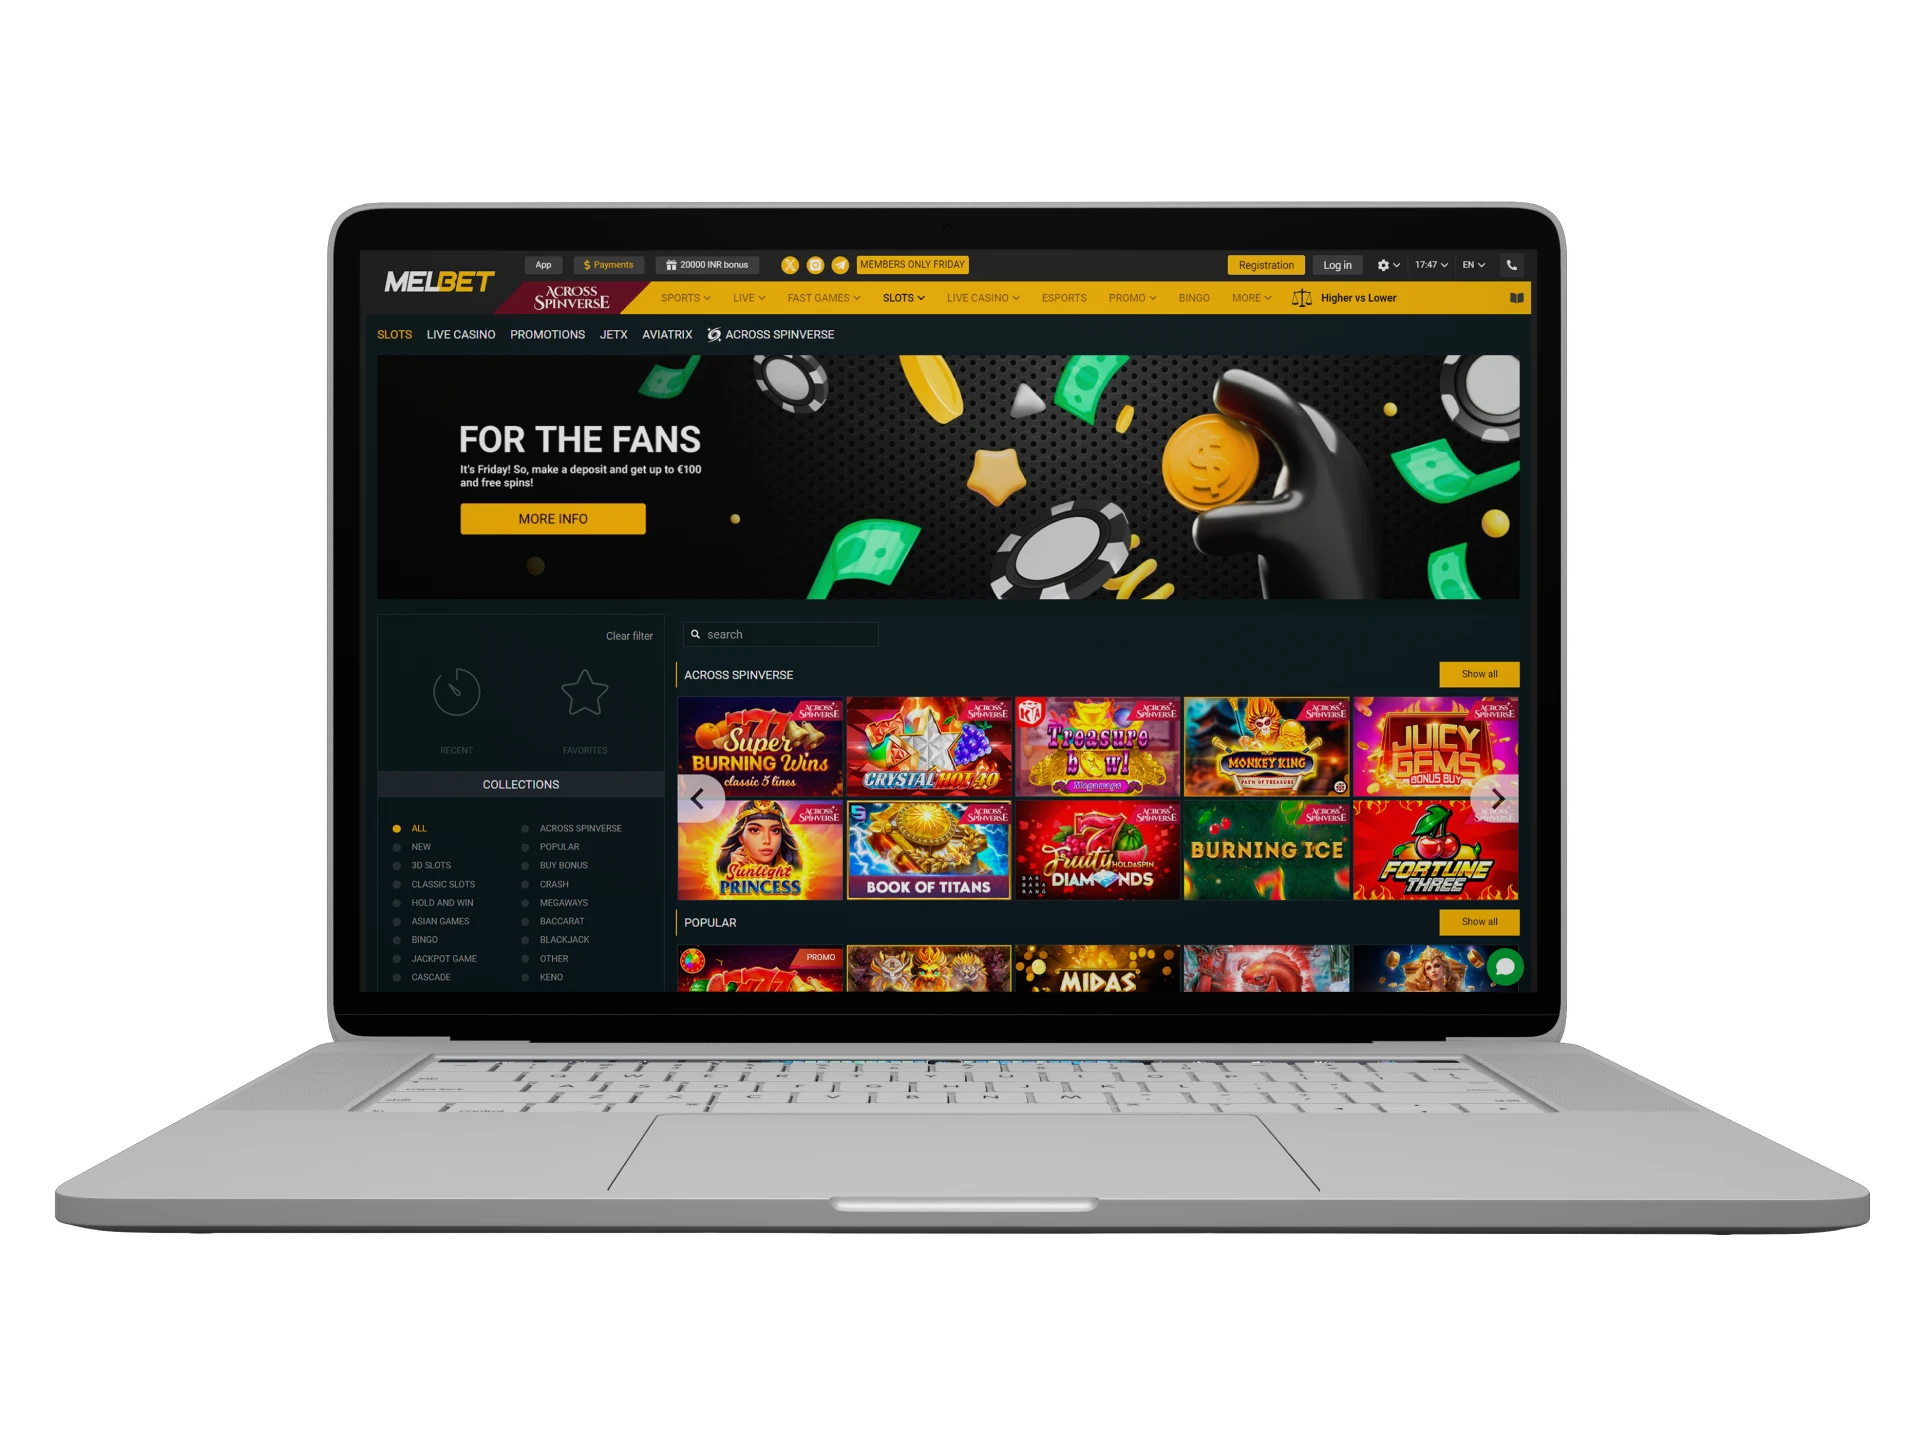 Play any slots with Melbet.